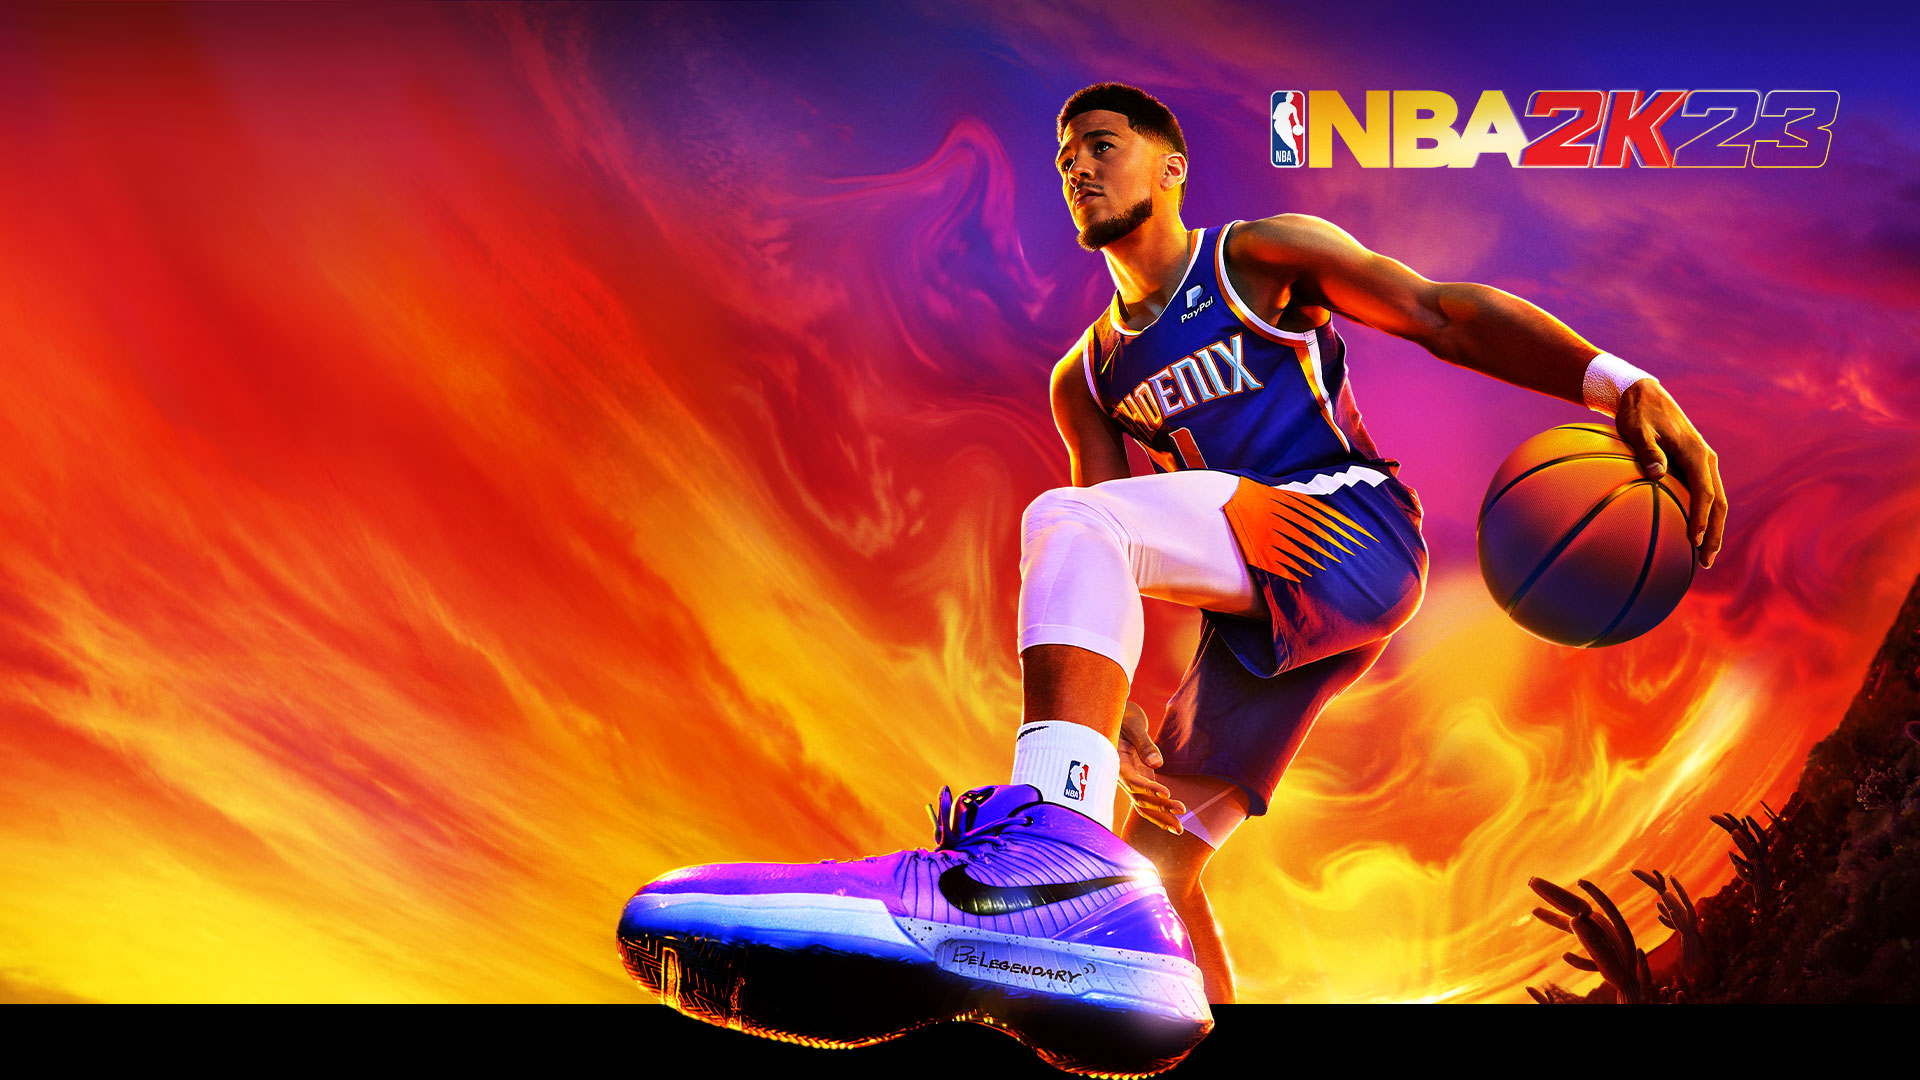 NBA 2K23, Devin Booker, number 1 for the Phoenix Suns, dribbles a basketball under a colourful desert sky.